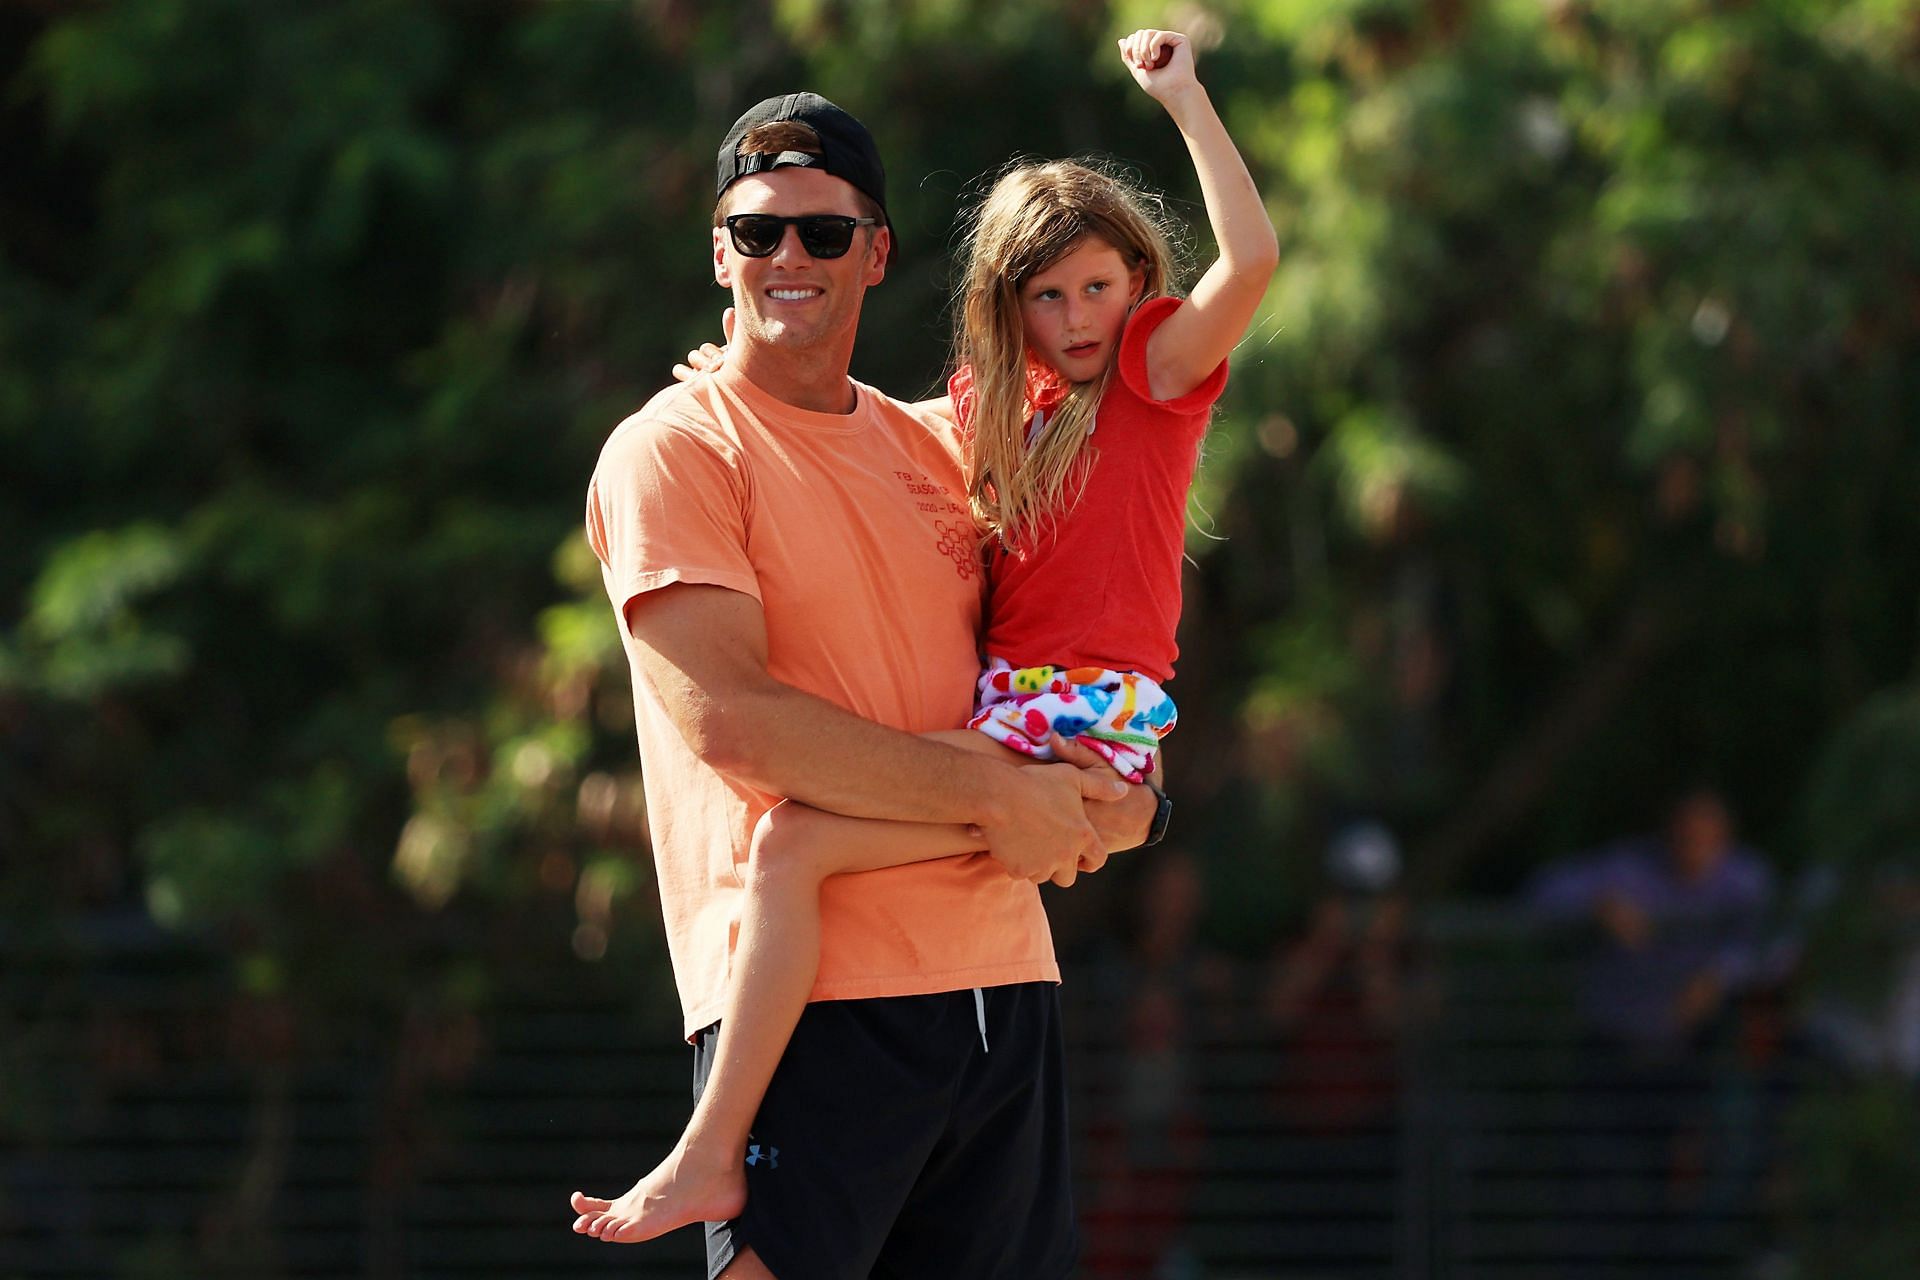 Brady at the Tampa Bay Buccaneers Victory Parade